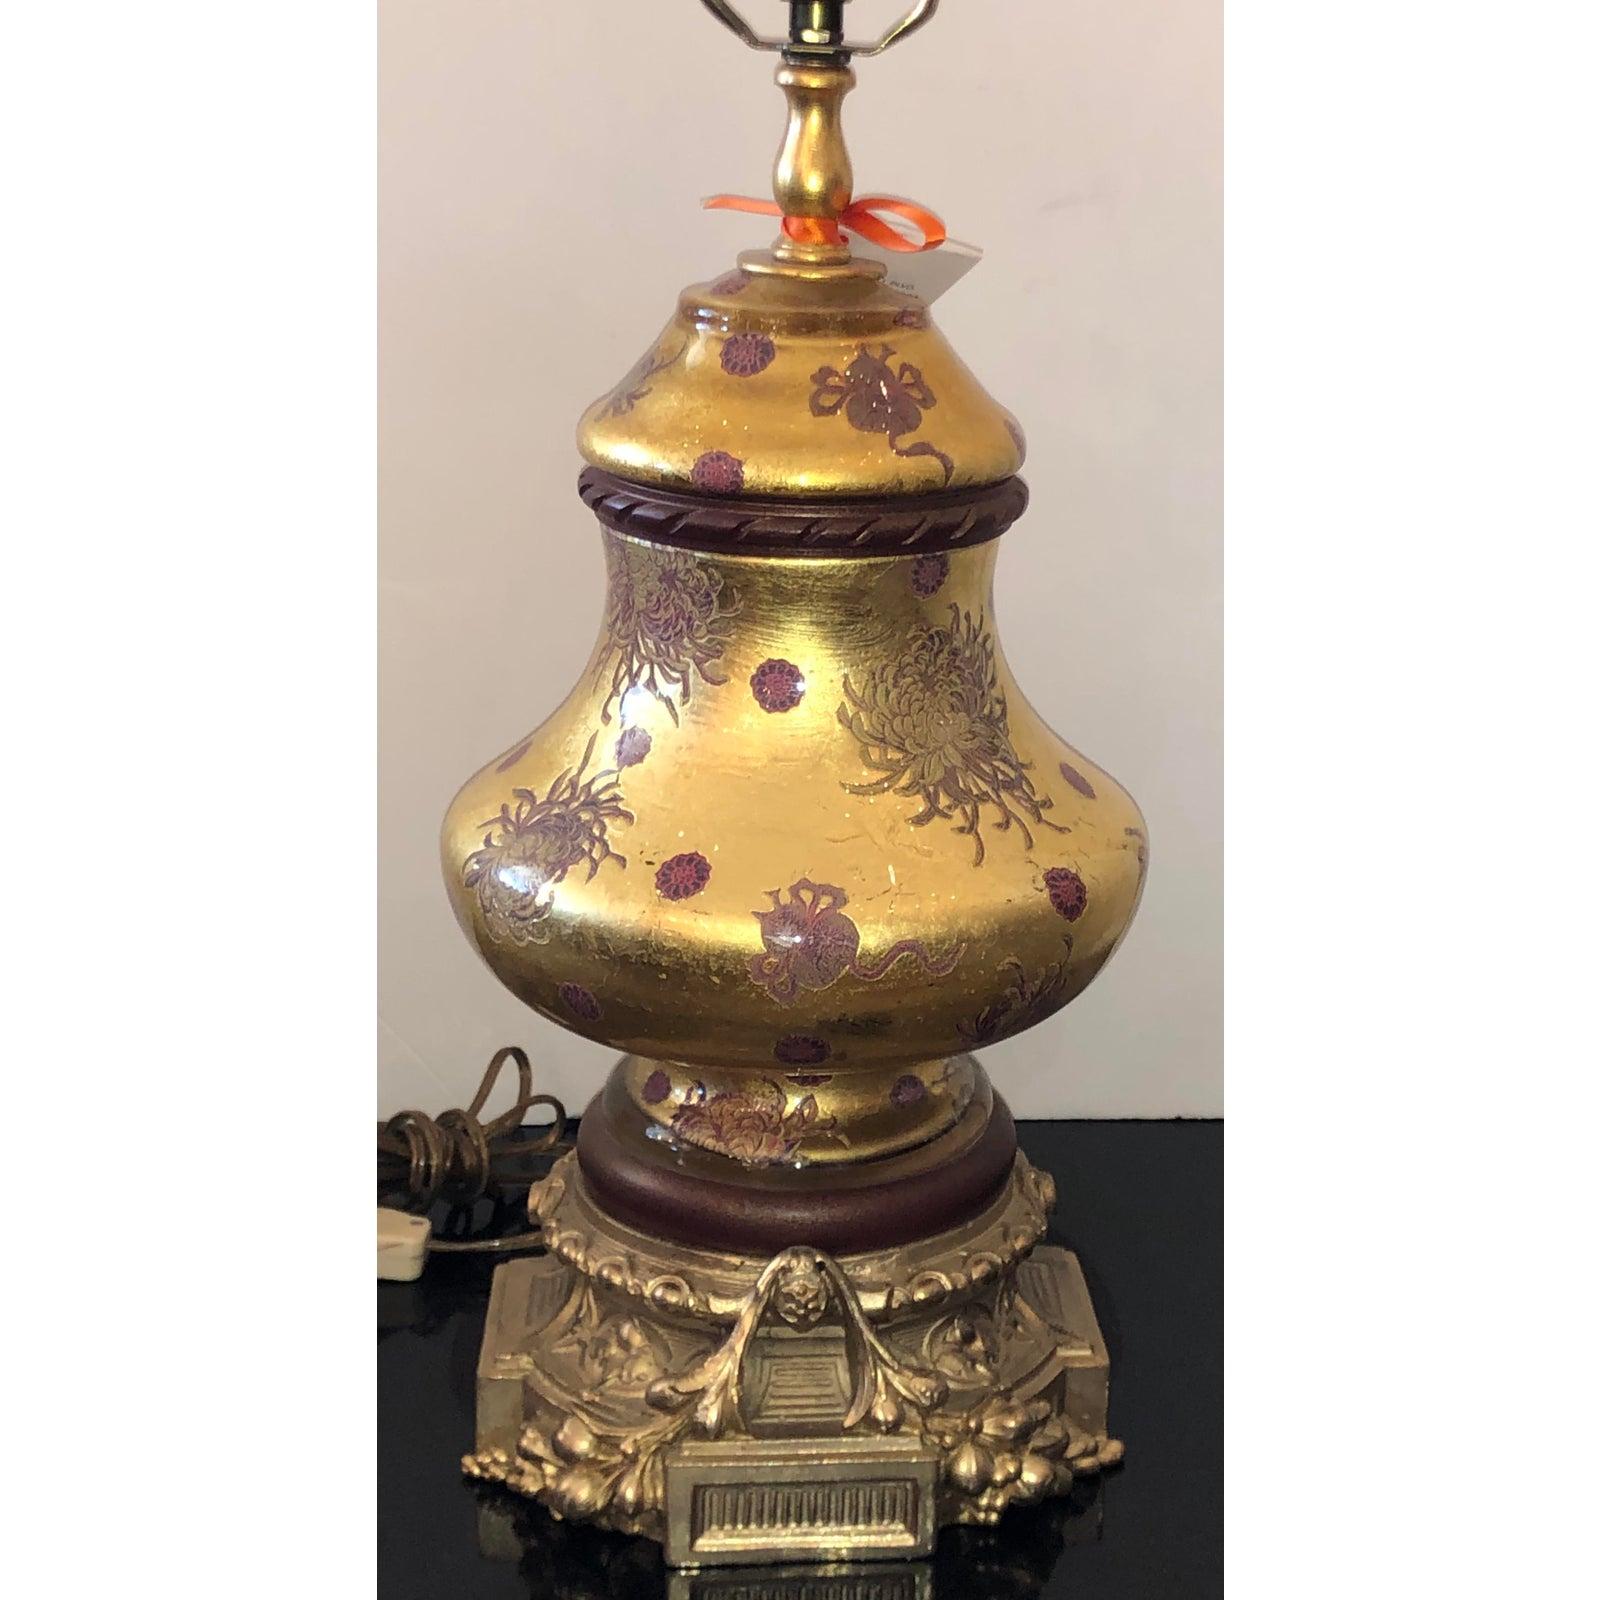 Vintage Eglomese French Art Glass & Gilt Bronze table lamp. Includes harp and finial.

Additional information:
Materials: Art glass, bronze
Color: Bronze
Period: Early 20th century
Styles: French
Lamp Shade: Not Included
Item Type: Vintage,